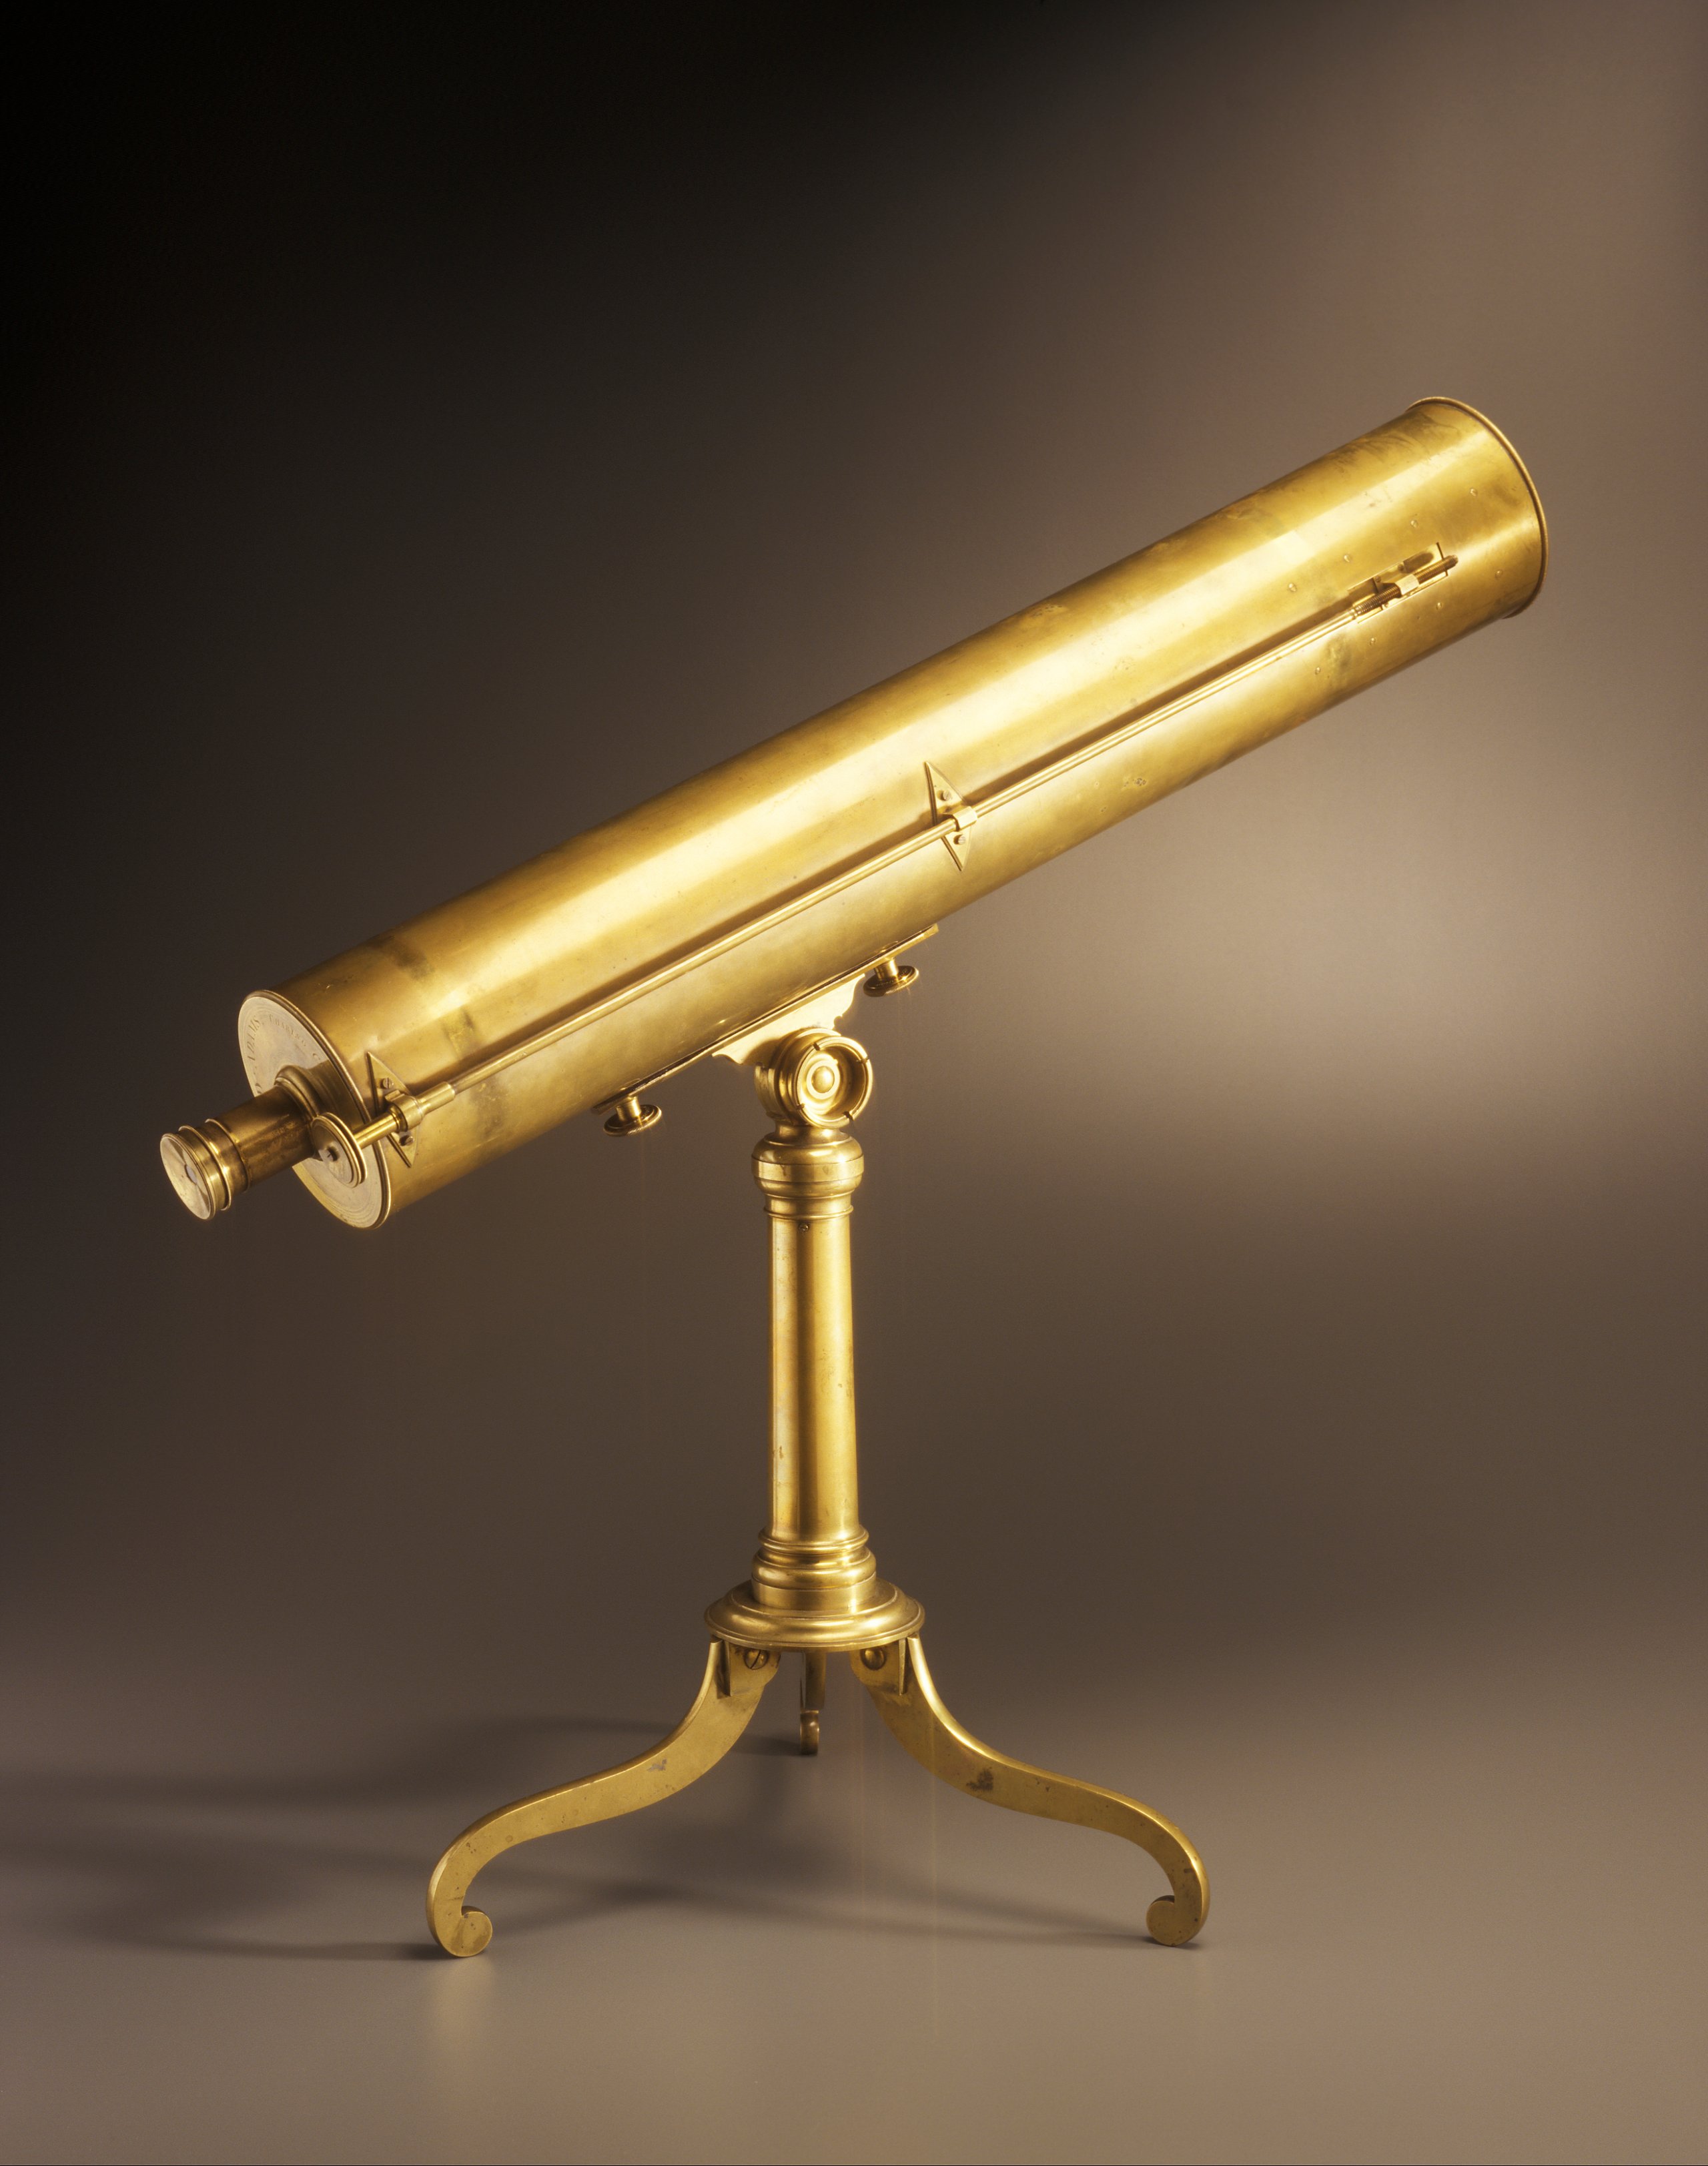 Telescope made by Dudley Adams, England